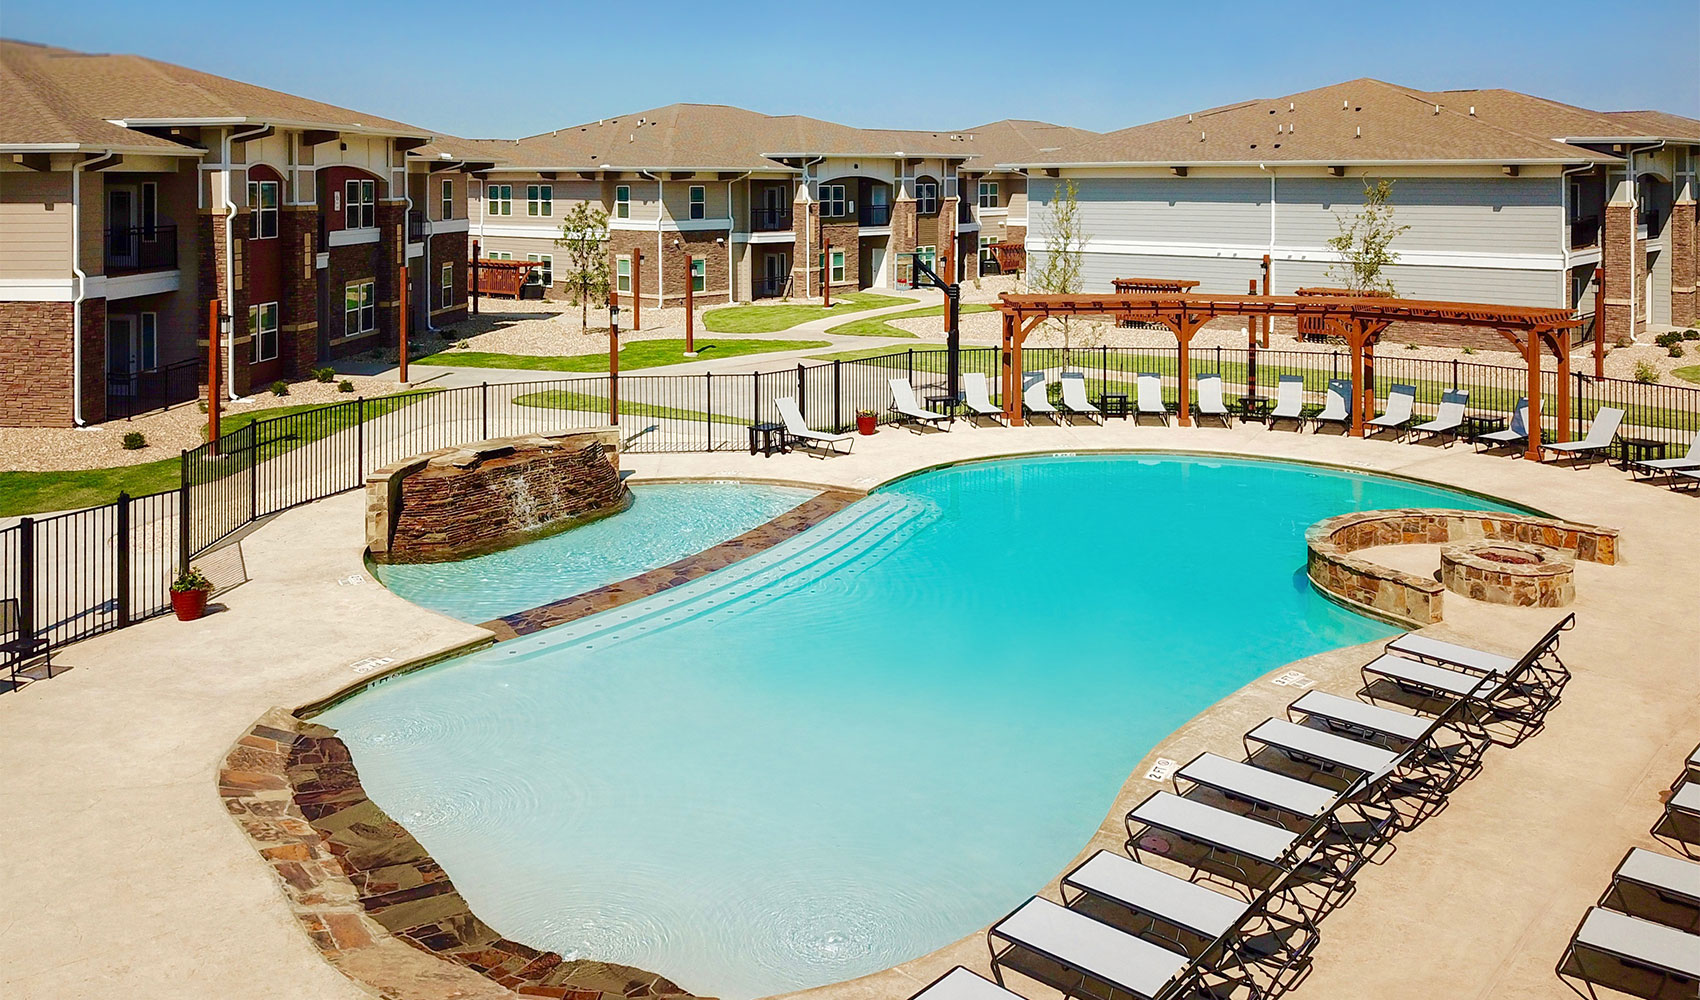 Apartments in Wolfforth, TX